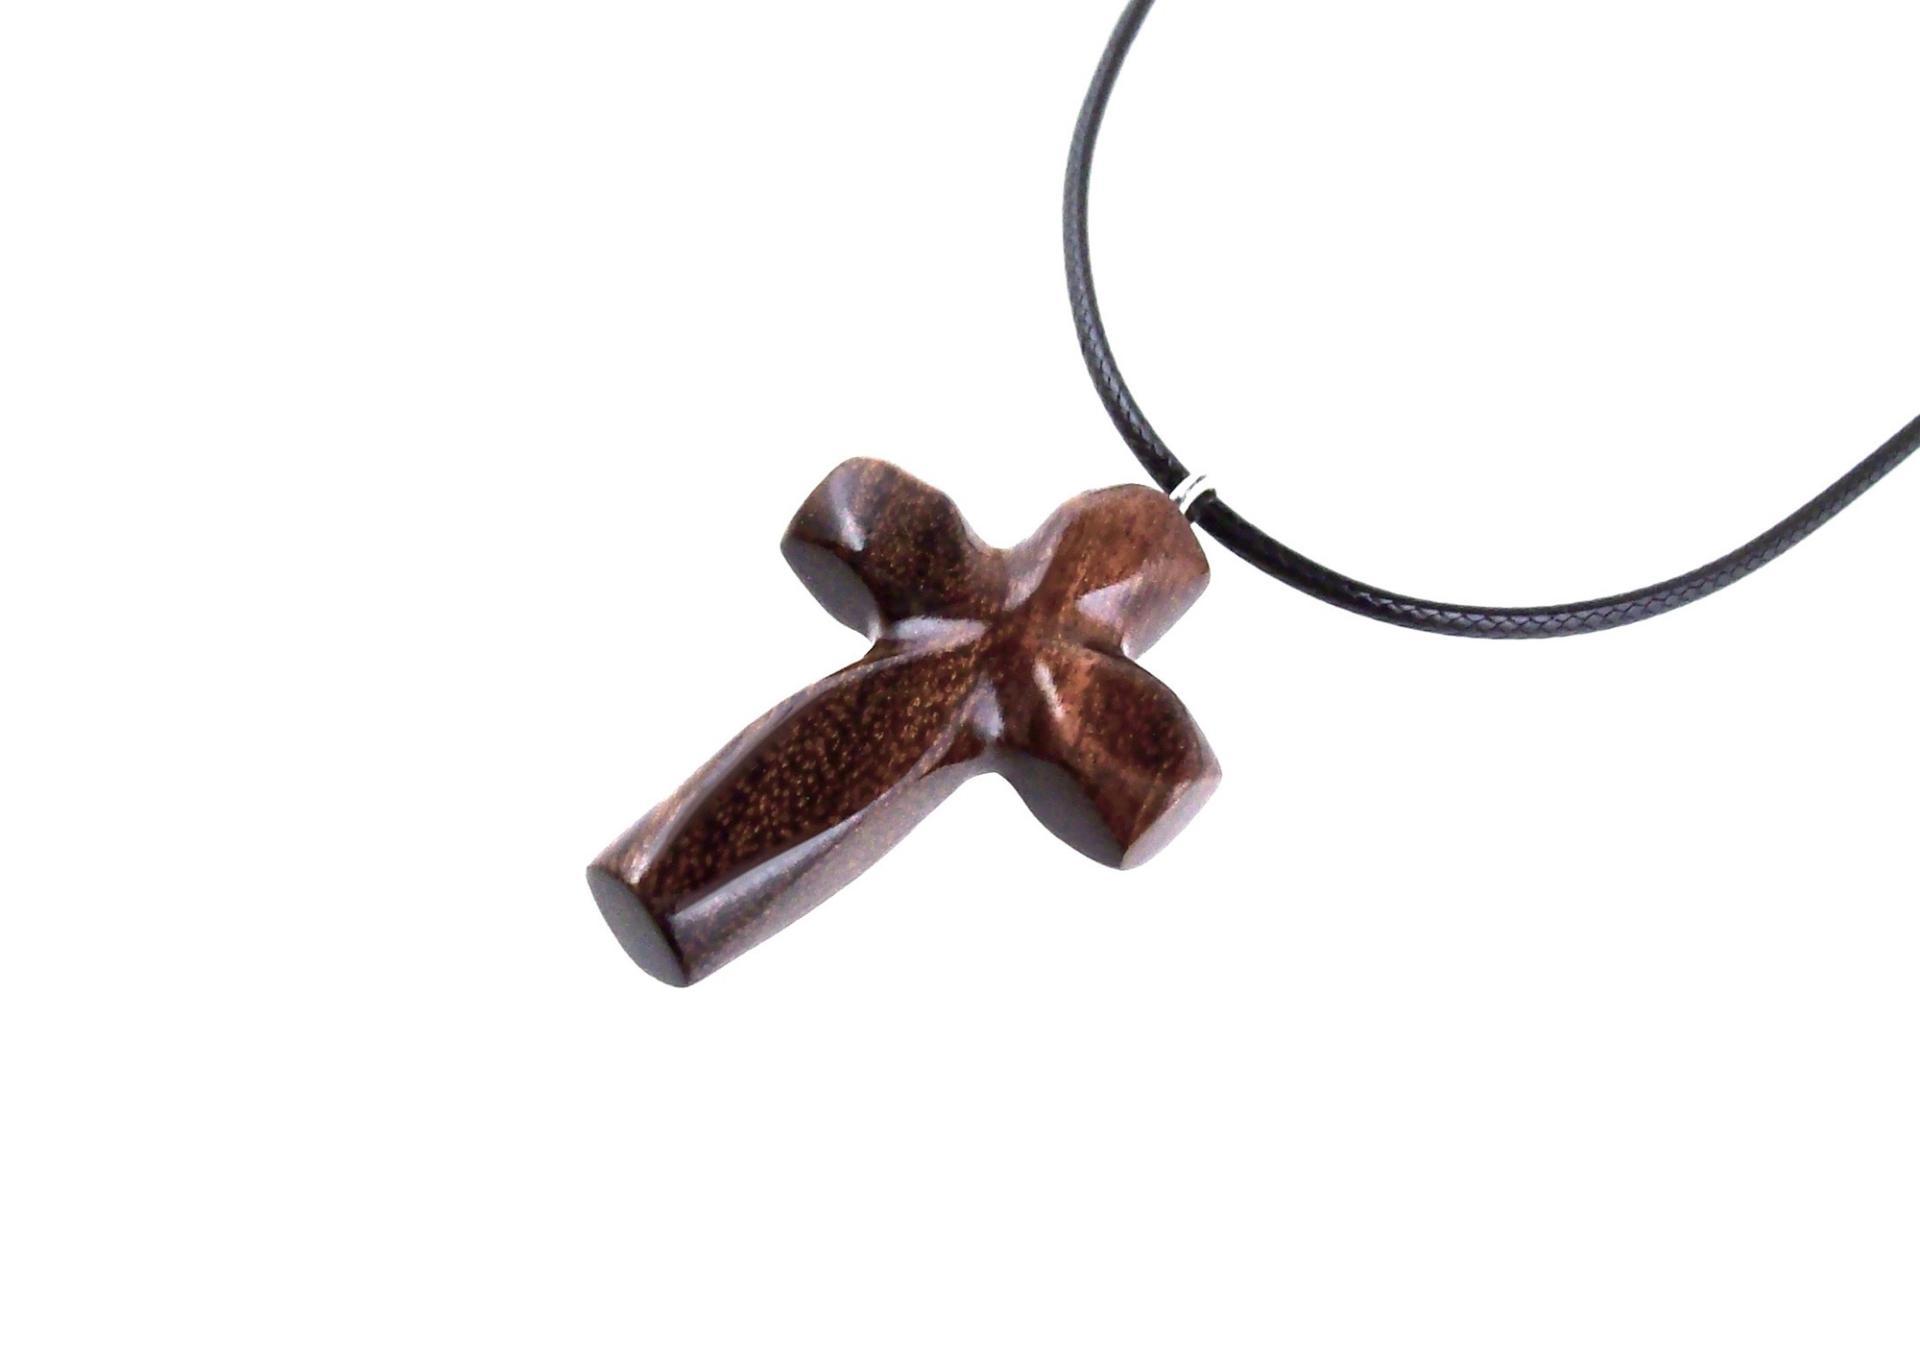 Handmade Wooden Cross Necklace for Men Women, Wood Cross Pendant, Hand Carved Christian Jewelry, One of a Kind Gift for Him Her